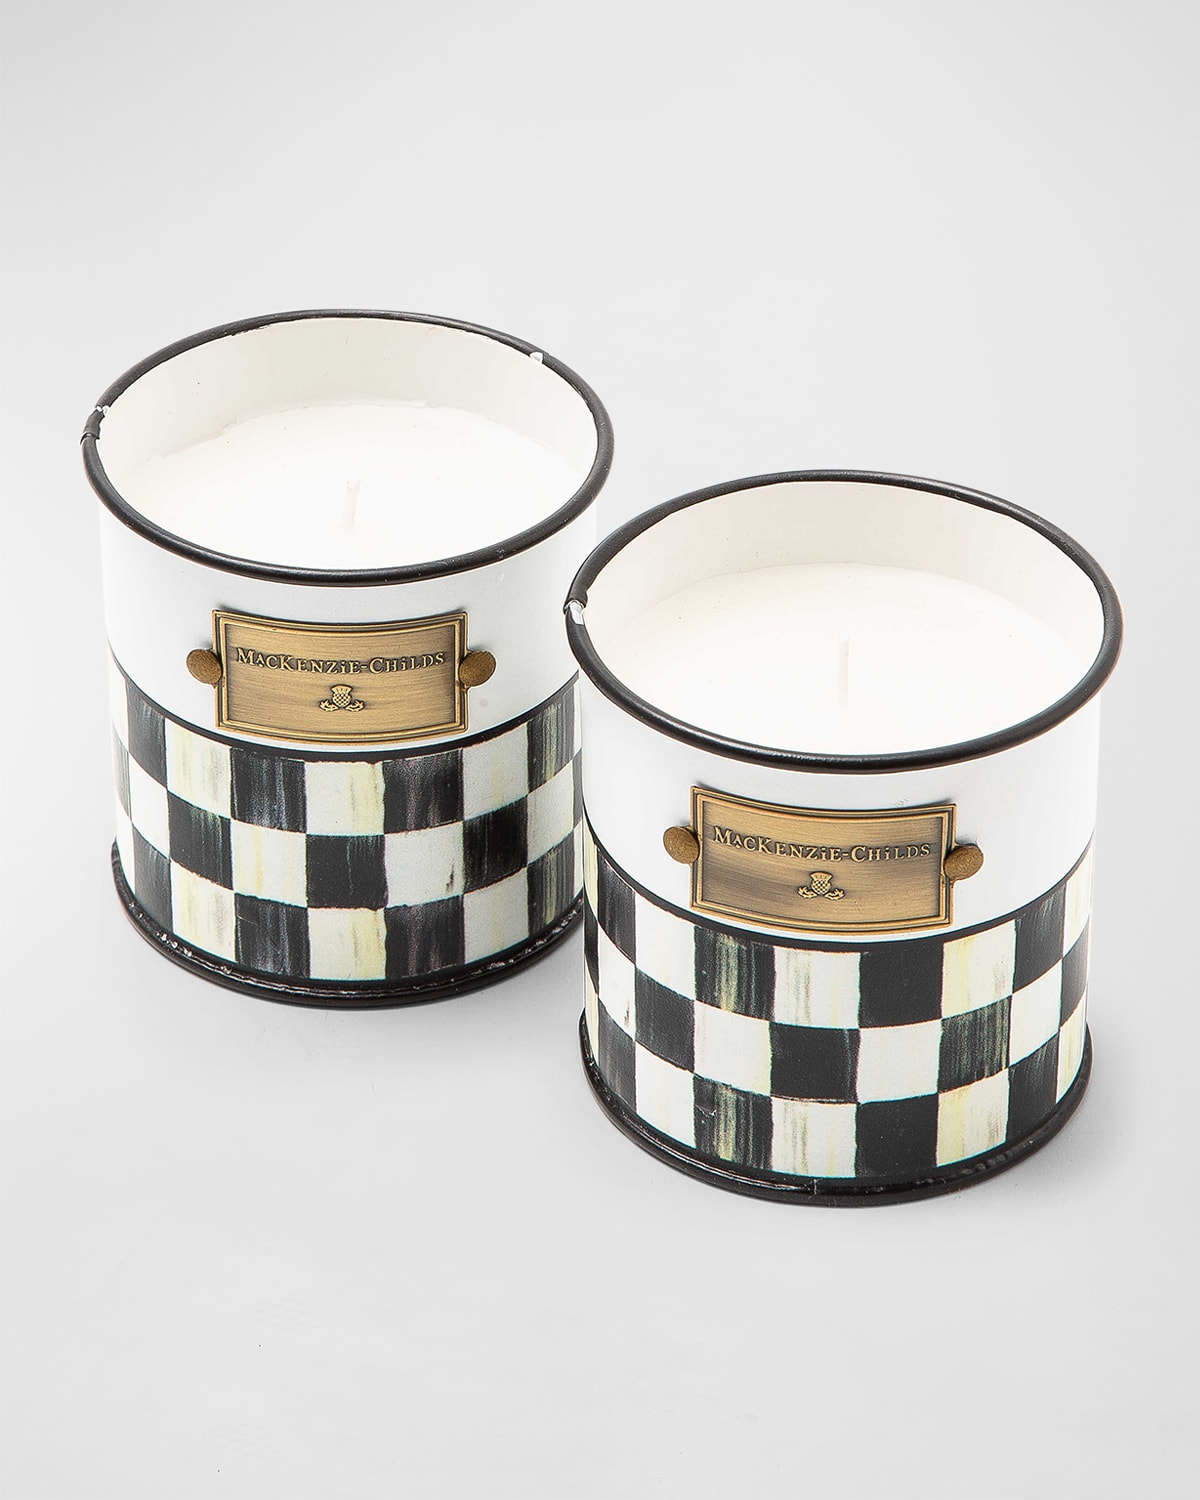 Mackenzie-childs Spectator Citronella Candles - Small, Set Of 2